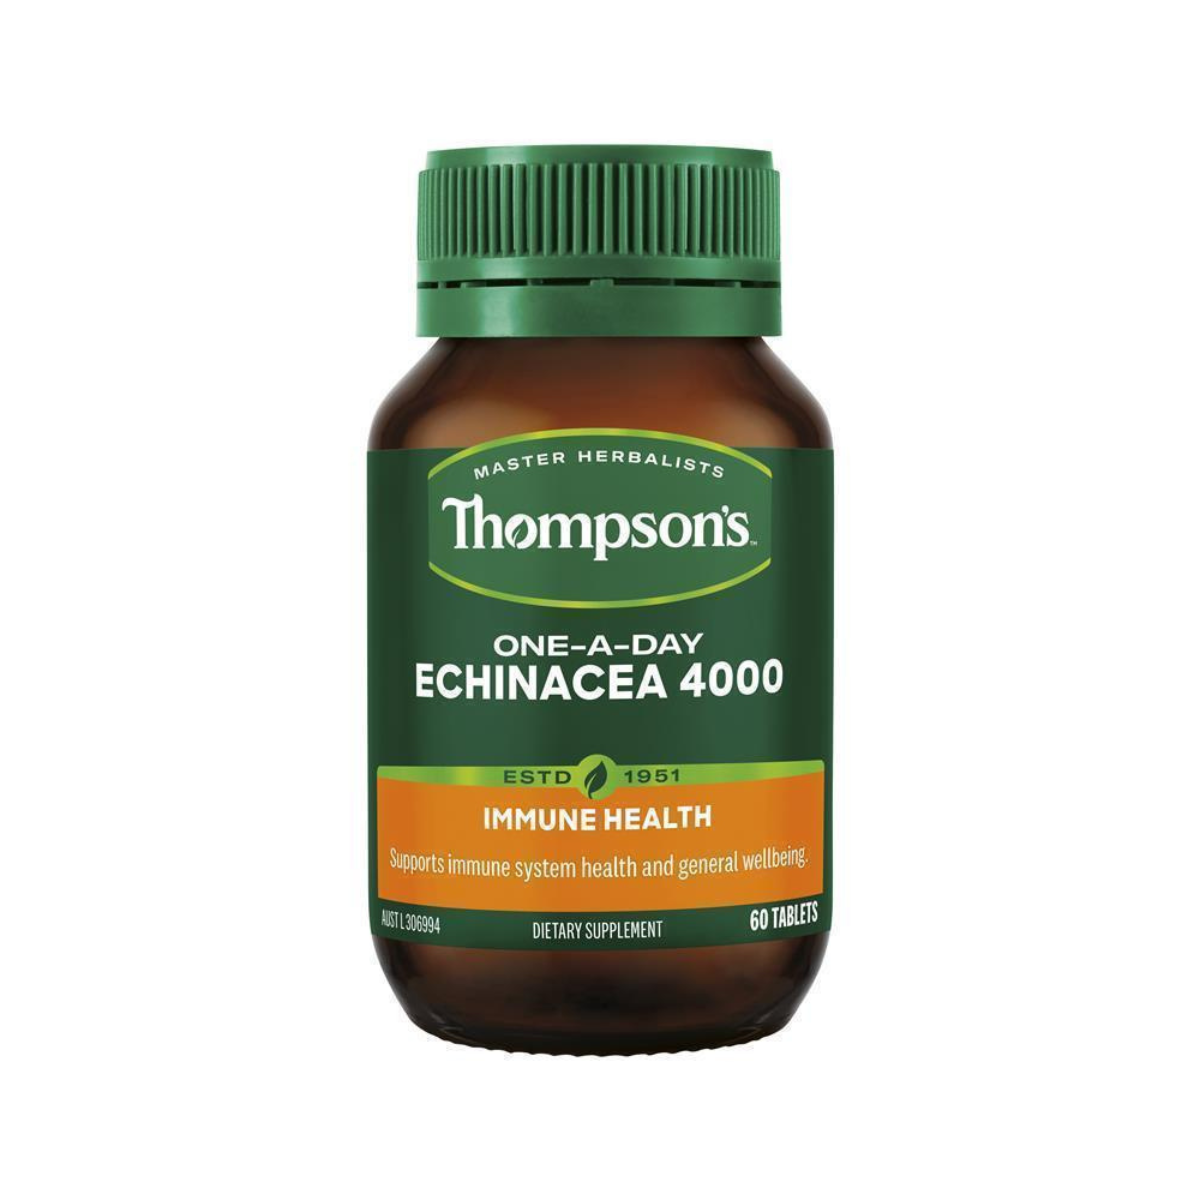 One-A-Day Echinacea 4000mg 60t